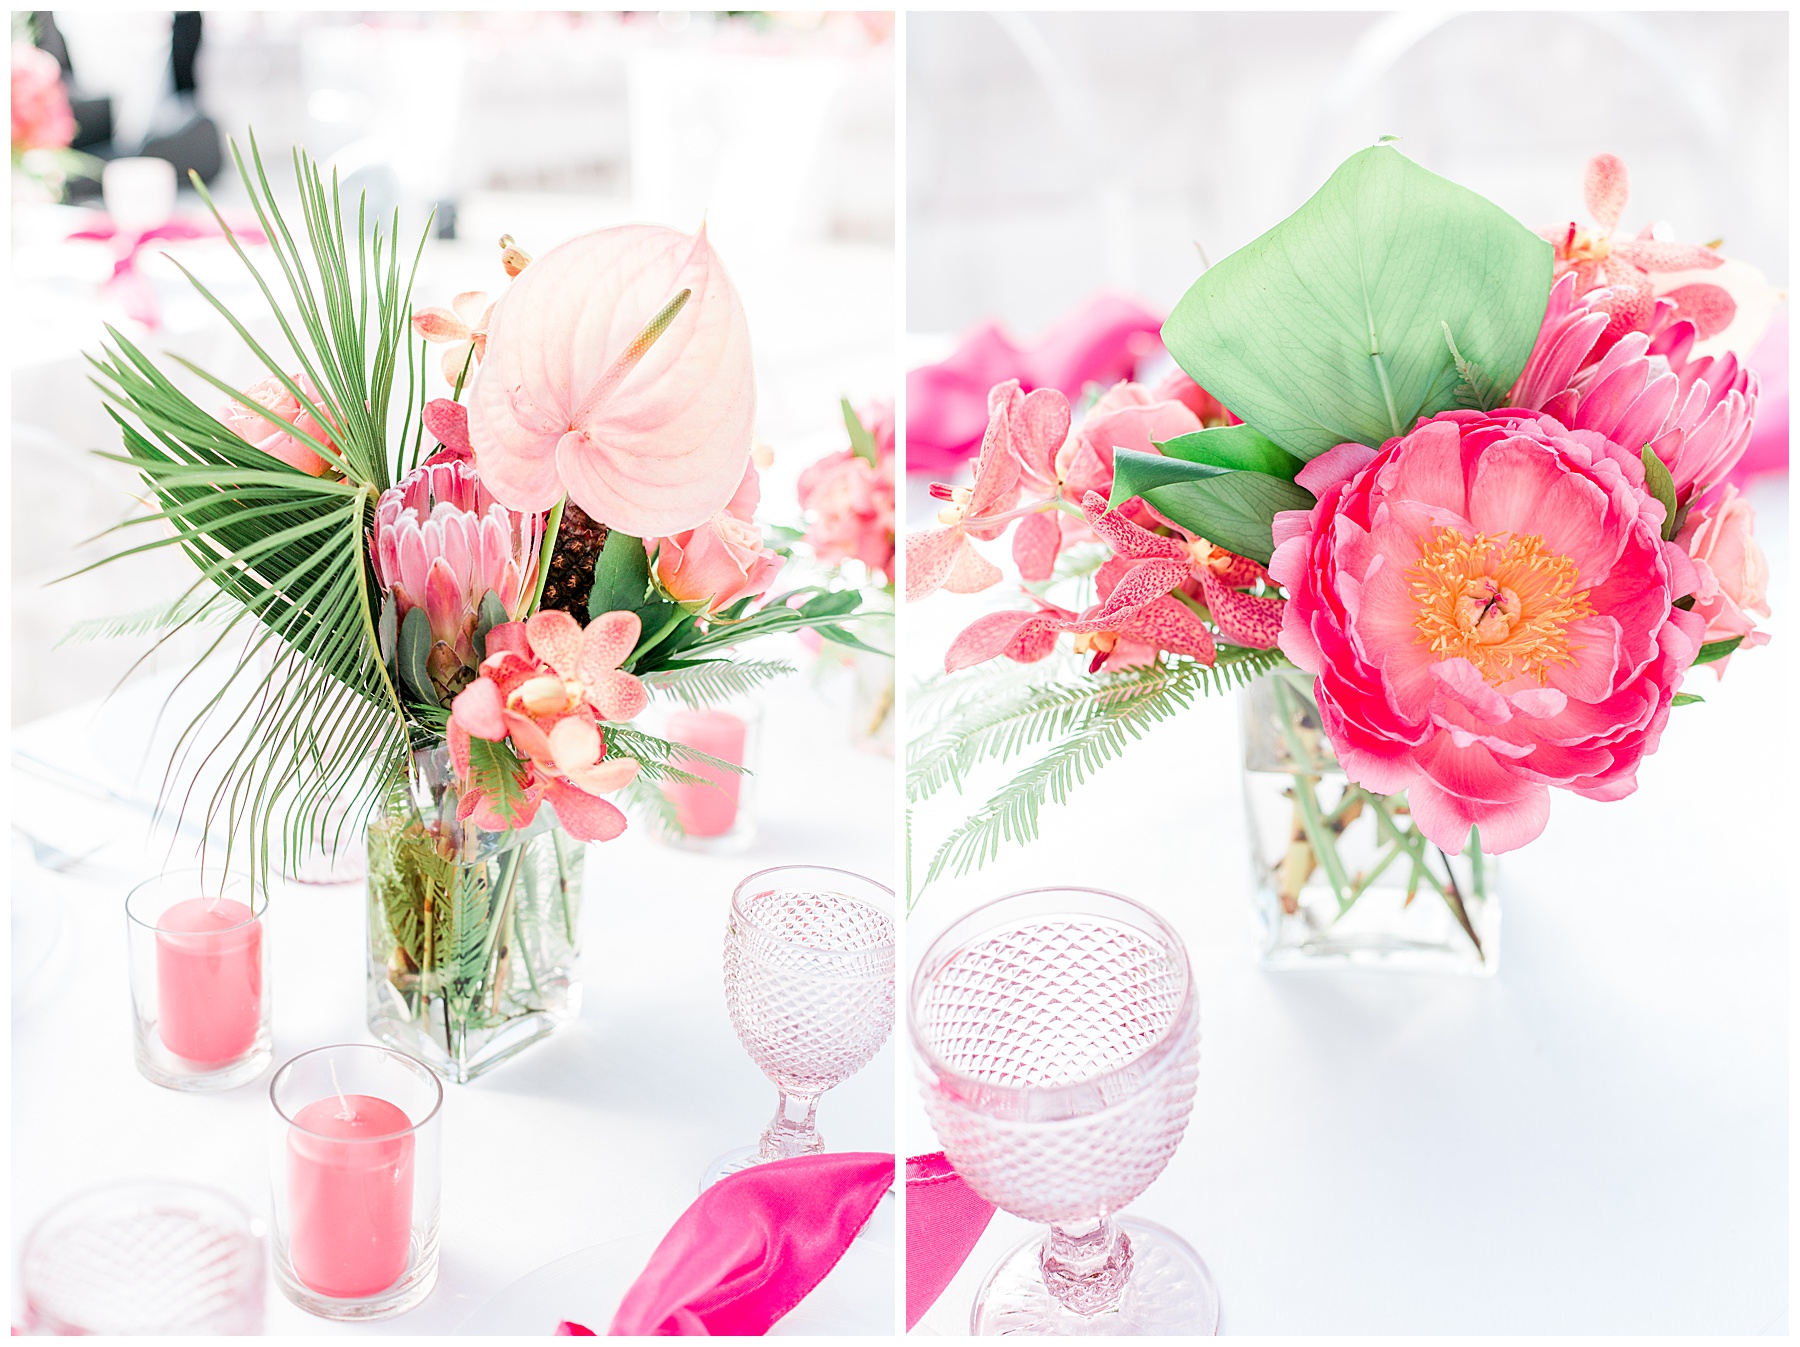 pink flowers as decoration on a table